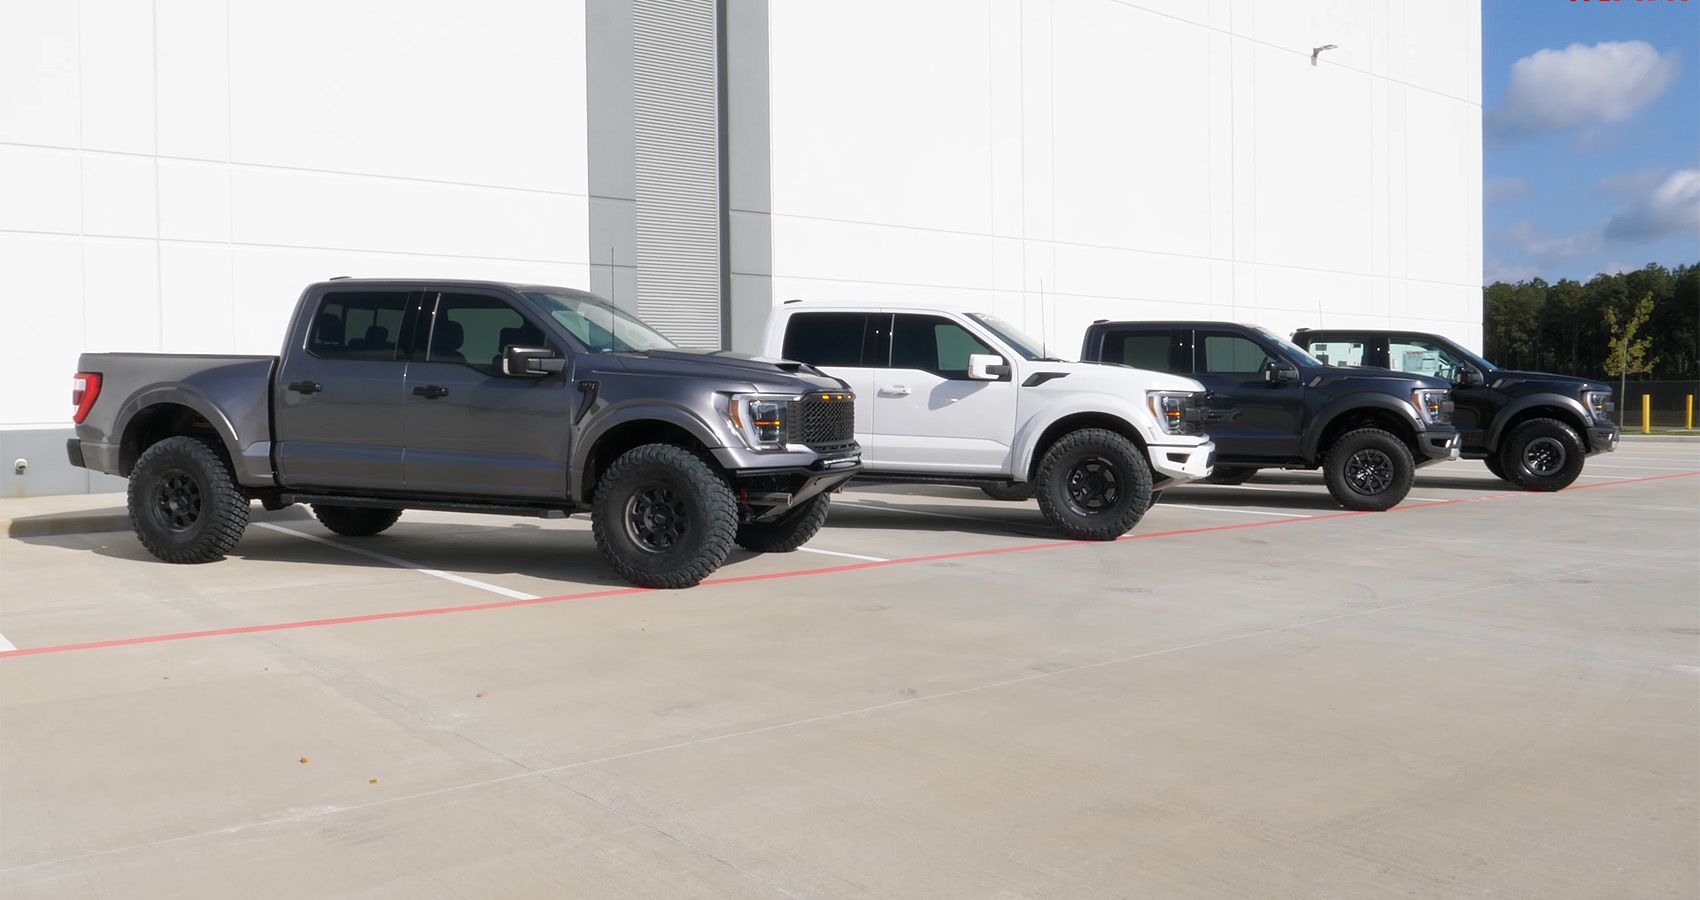 Comparison Of Three Modified Ford Raptors With The Stock One 